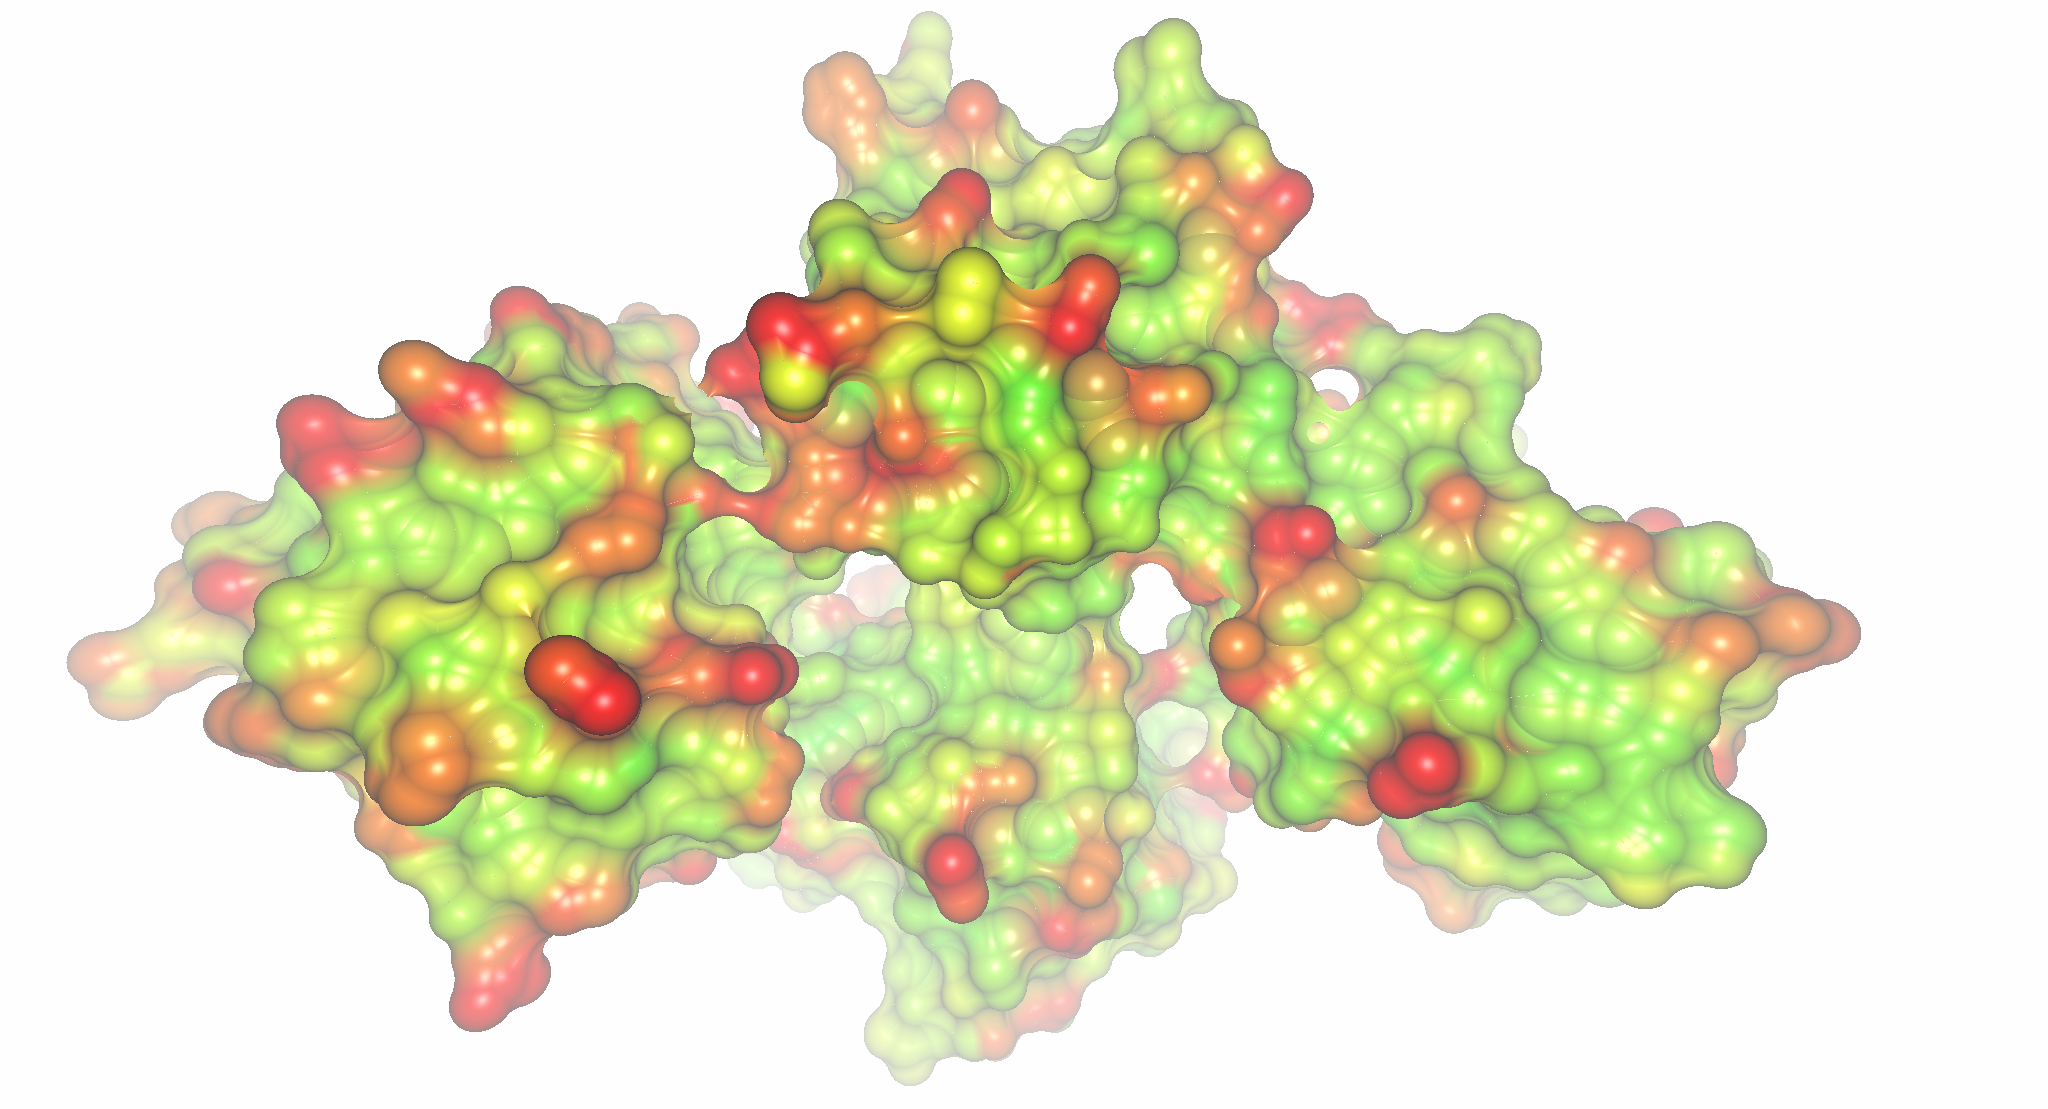 Molecular surface colored by temp-factors.